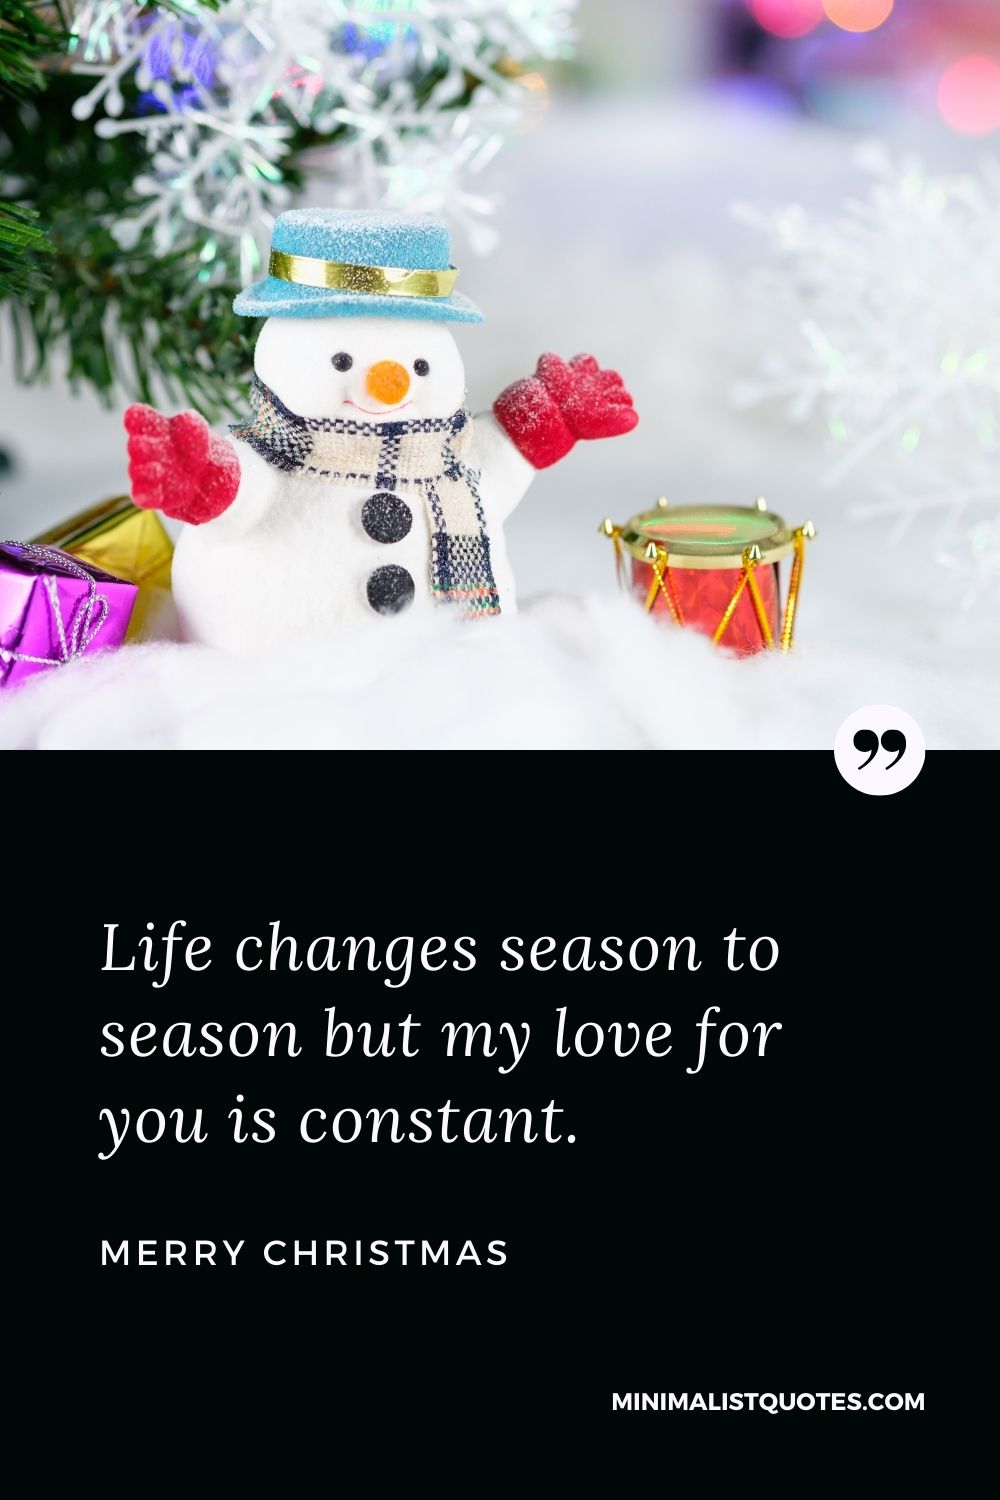 Merry Christmas Wish - Life changes season to season but my love for you is constant.